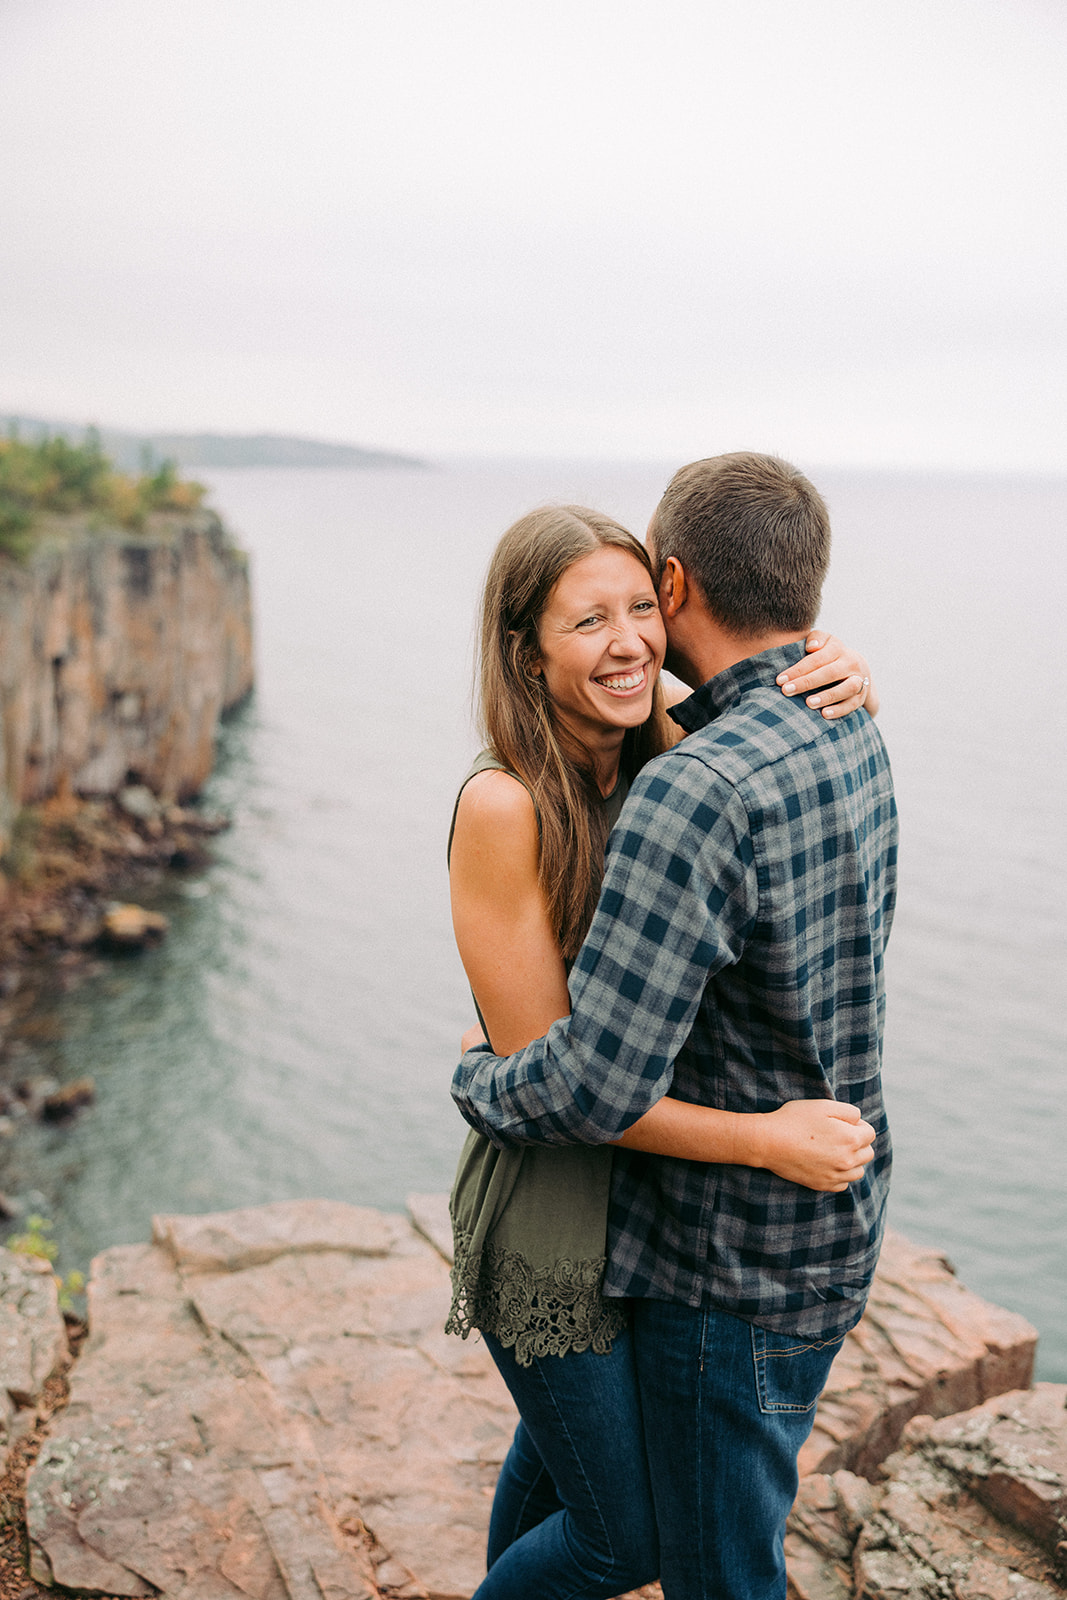 Brainerd's Natural Beauty: Jenna and AJ's North Shore engagement.